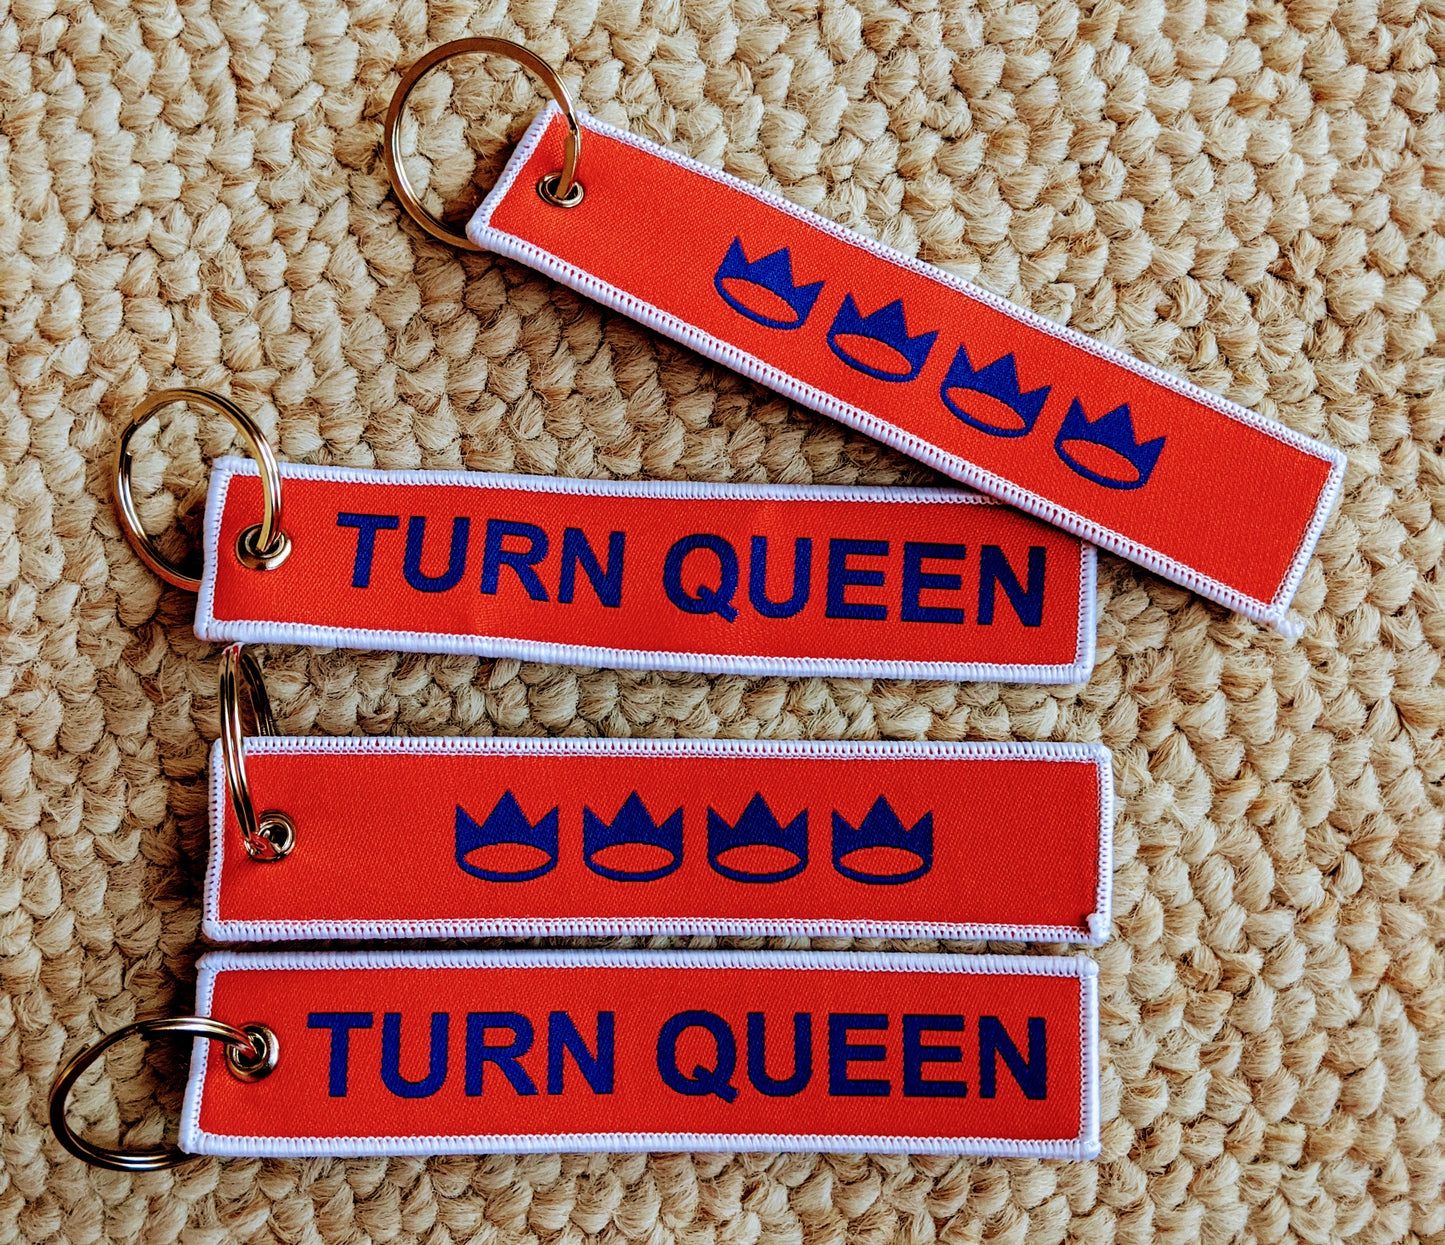 TURN QUEEN! Luggage Tag